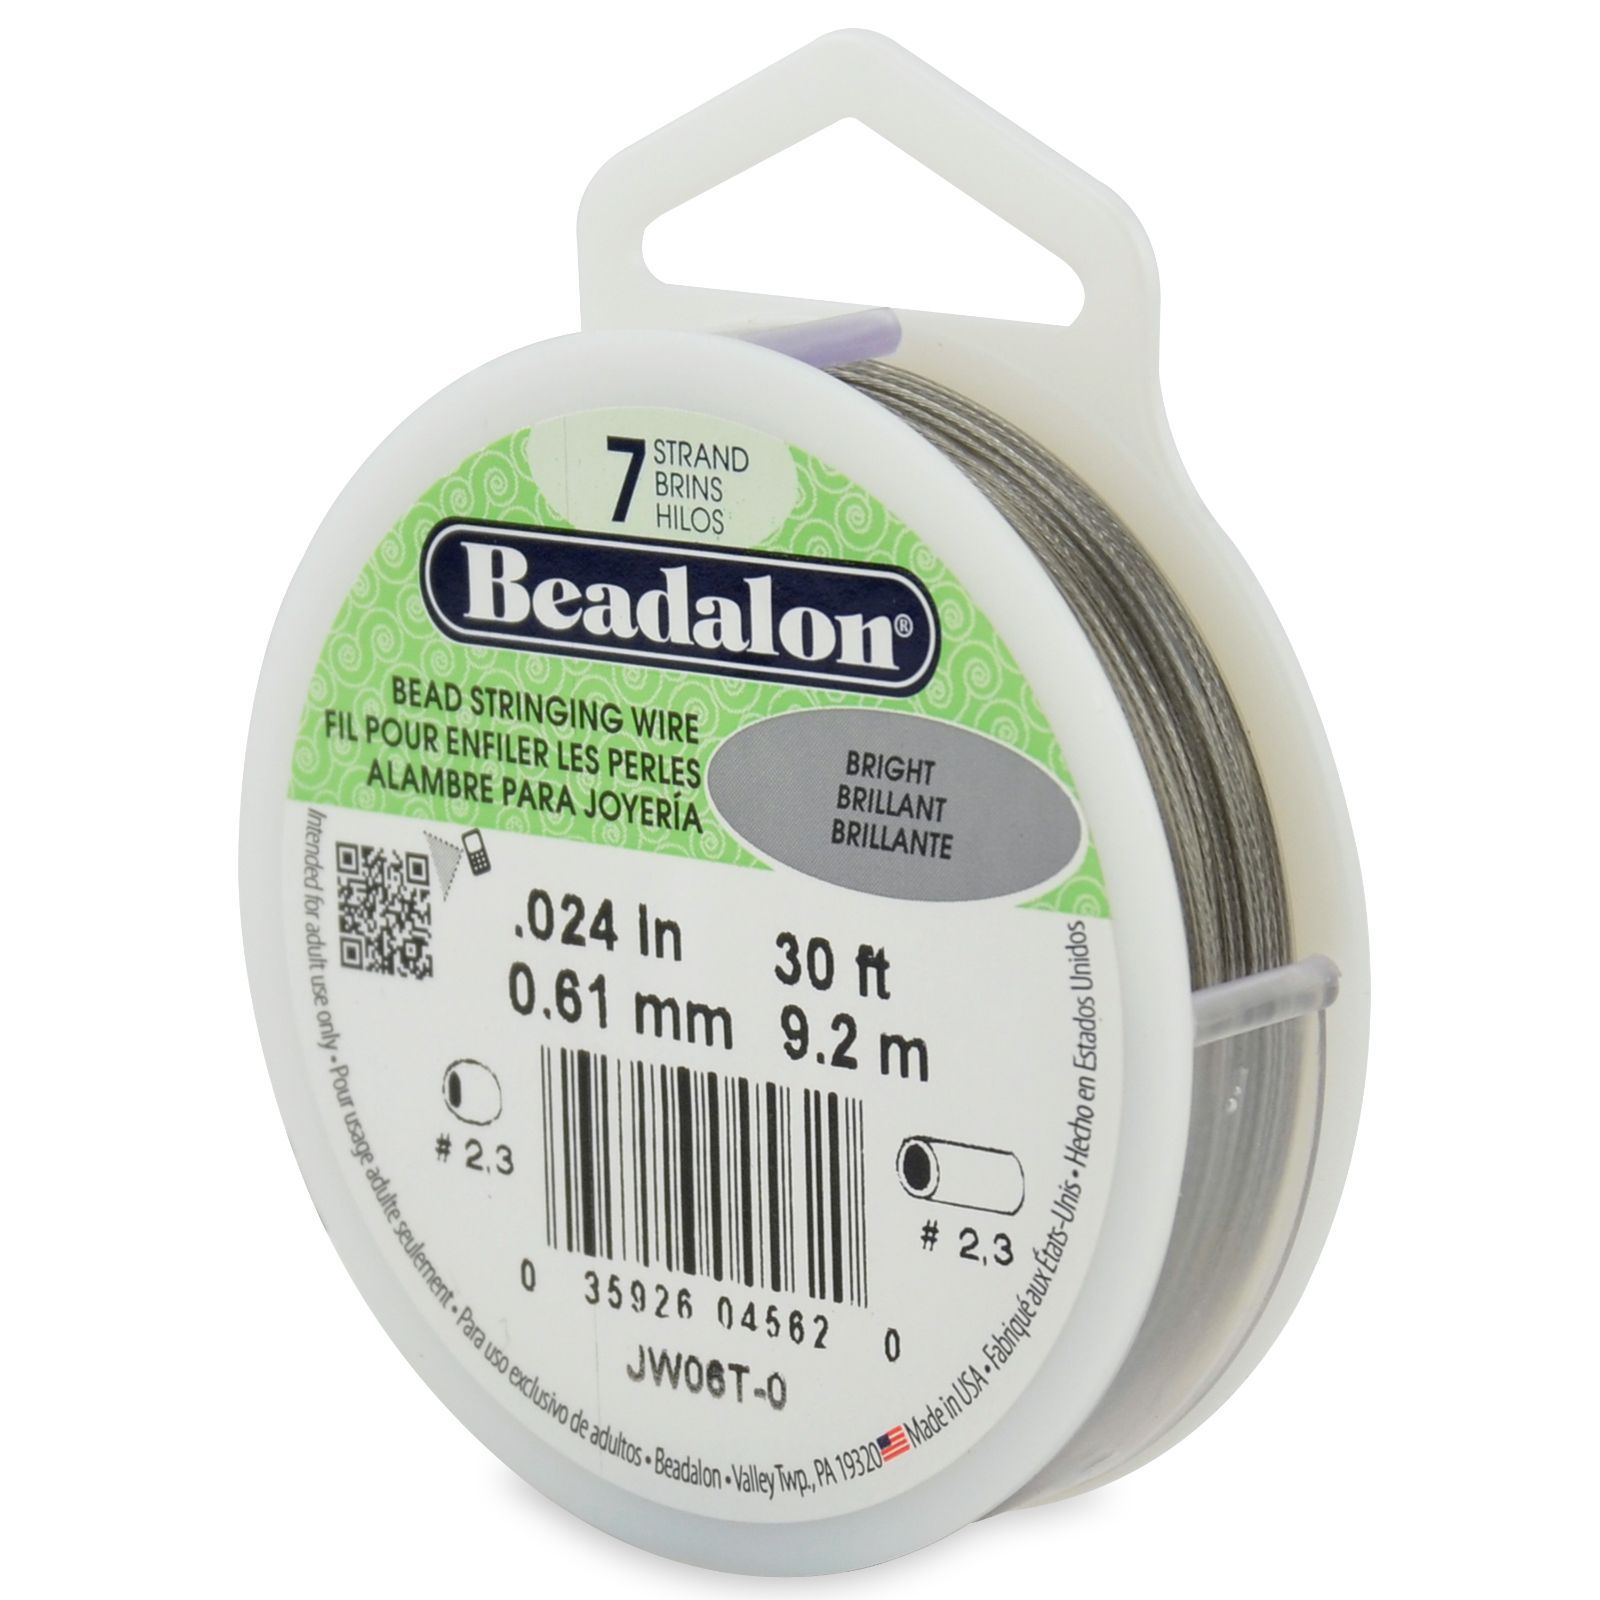 Beadalon Bead Stringing Wire. 30 FT Spool. Color is BRIGHT  Sizes.010-.012-.015-.018-.020-.024-.026 – Arizona Gems and Minerals